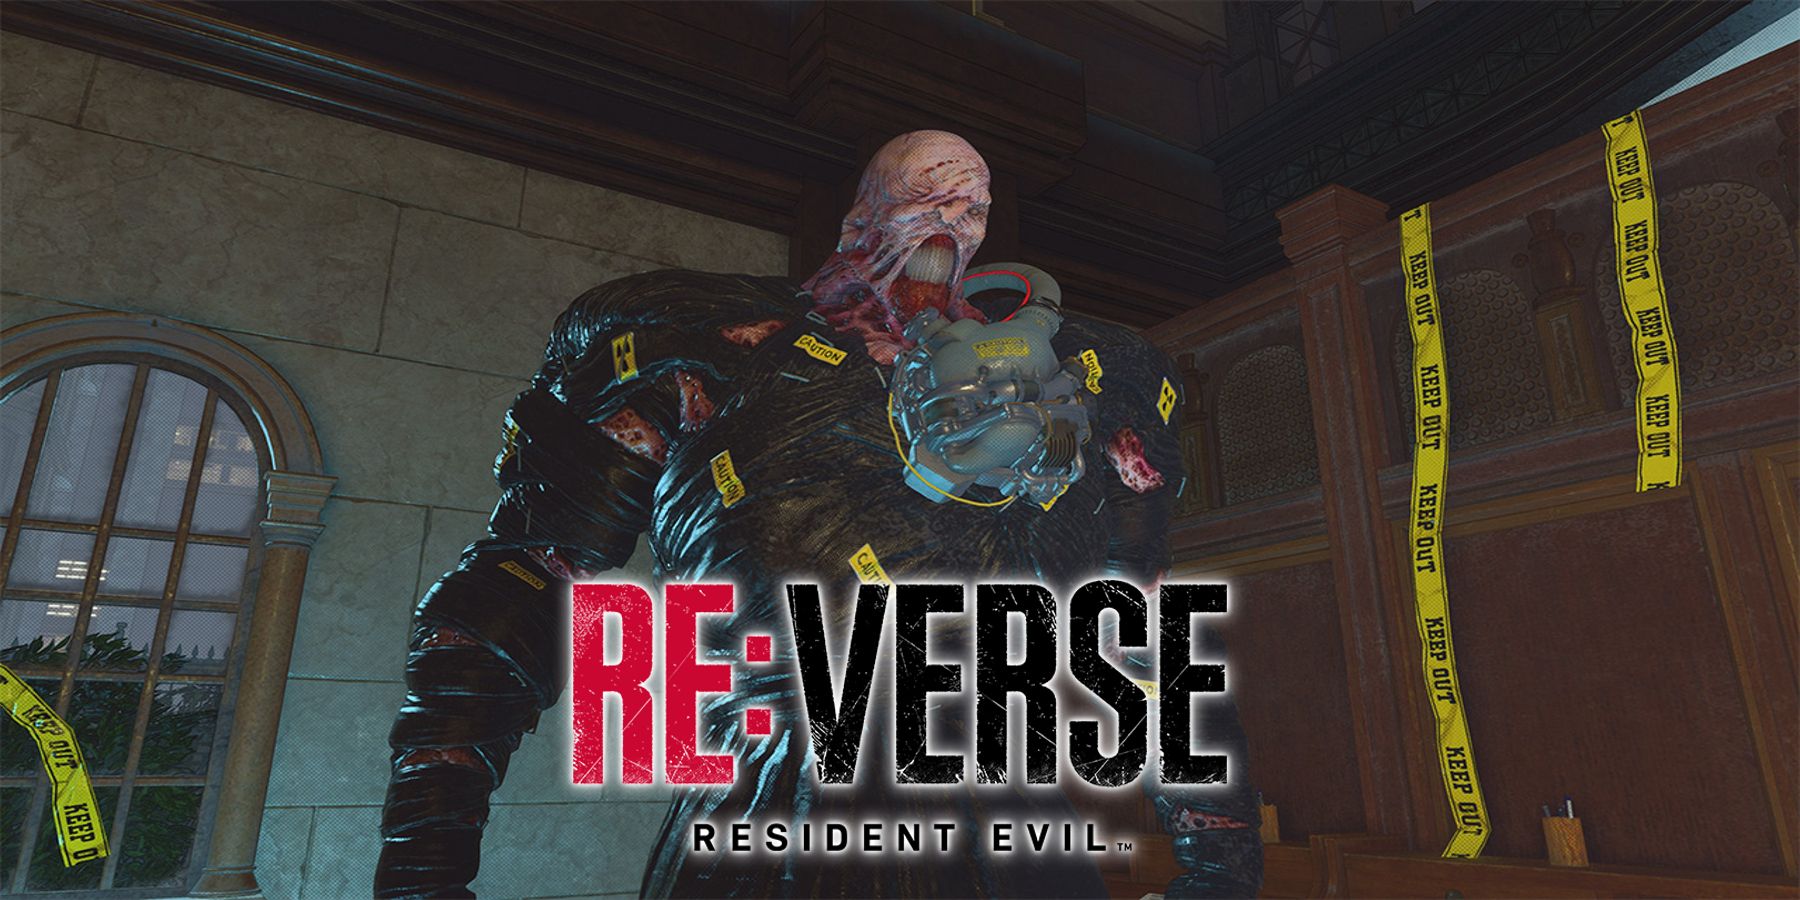 You Can Play Resident Evil Re:Verse Ahead Of Launch - GameSpot